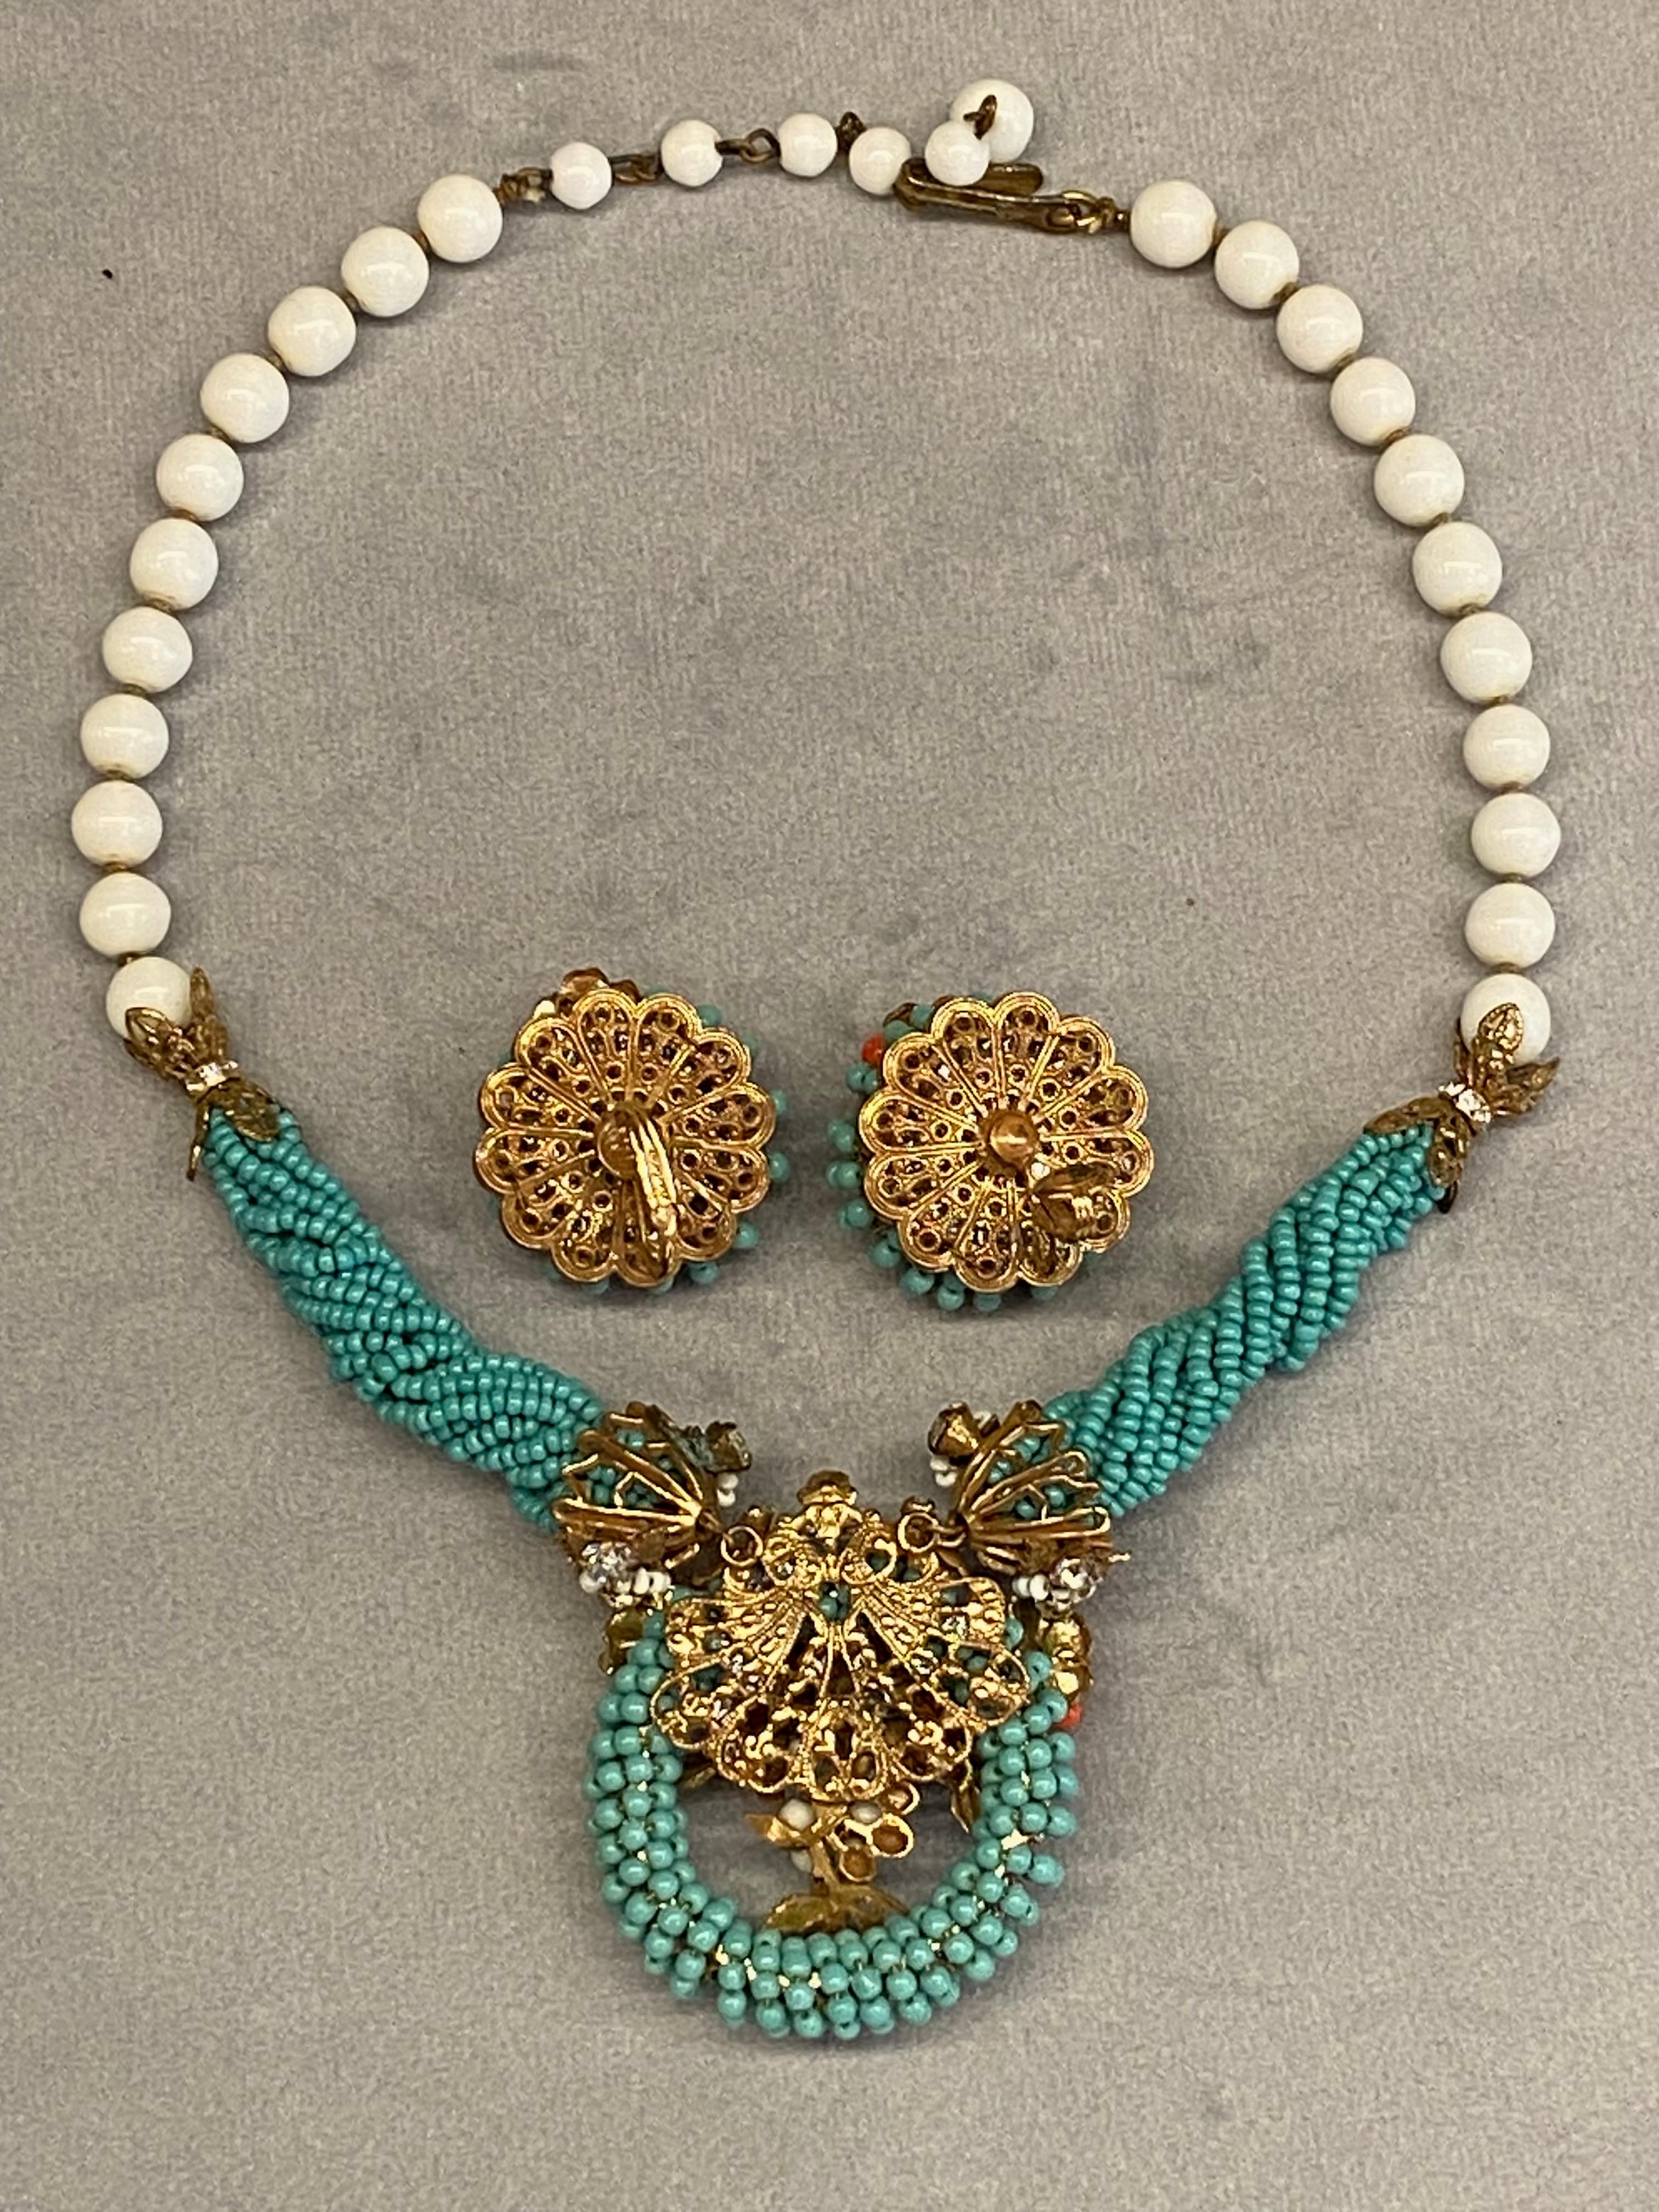 Original by Robert 1950s turquoise, coral & white glass beed necklace & earrings For Sale 6